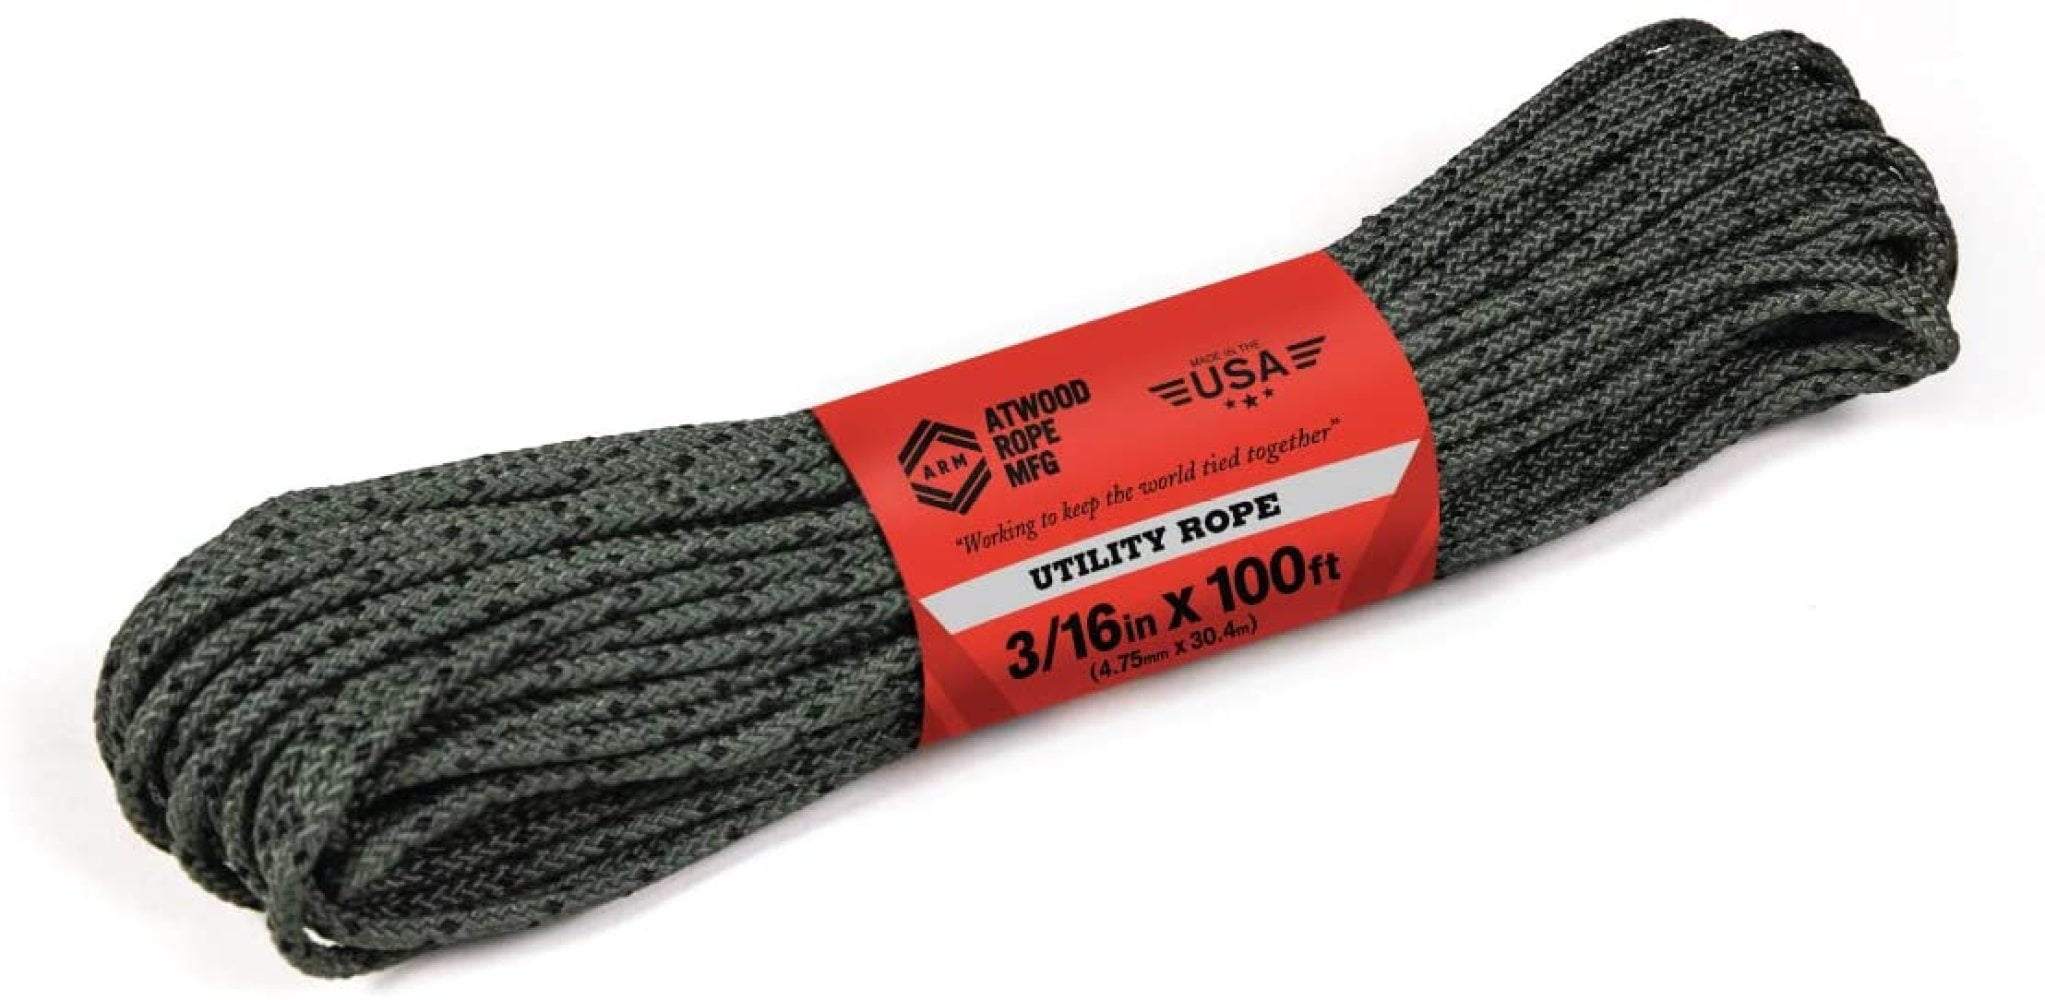 Lightweight Strong Versatile Rope for Camping Survival DIY Camouflage Atwood Rope MFG 3/16” inch Braided Utility Rope Knot Tying 100ft Made in USA